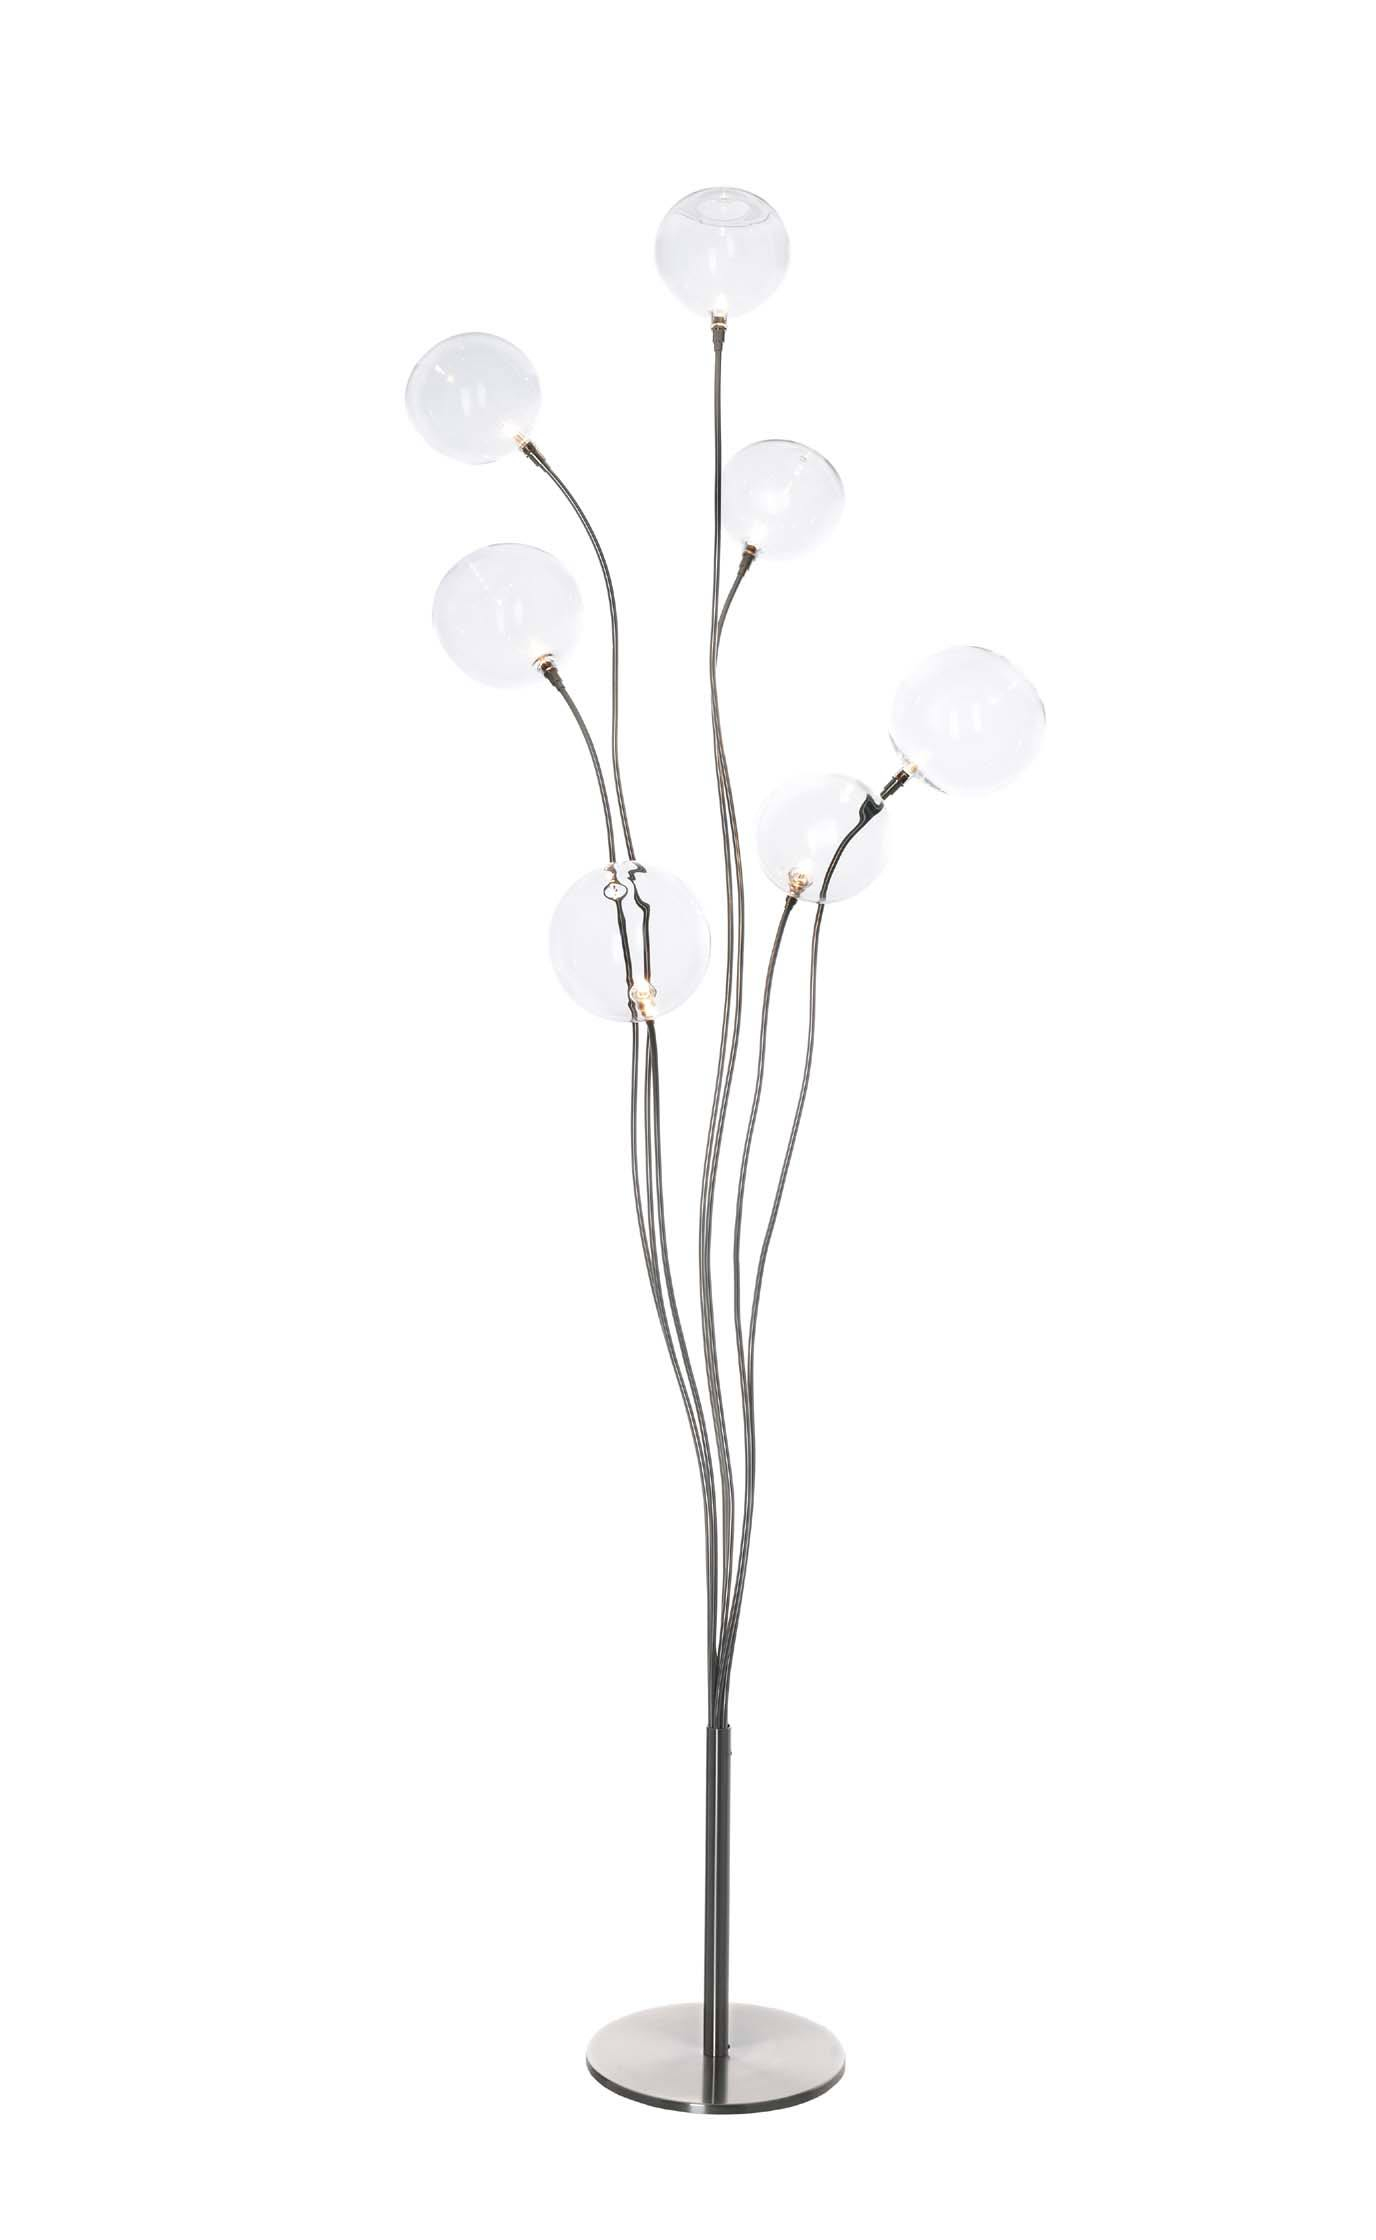 Spectacular Standard Lamp With 7 Lights In Clear Glass Balls intended for sizing 1376 X 2240